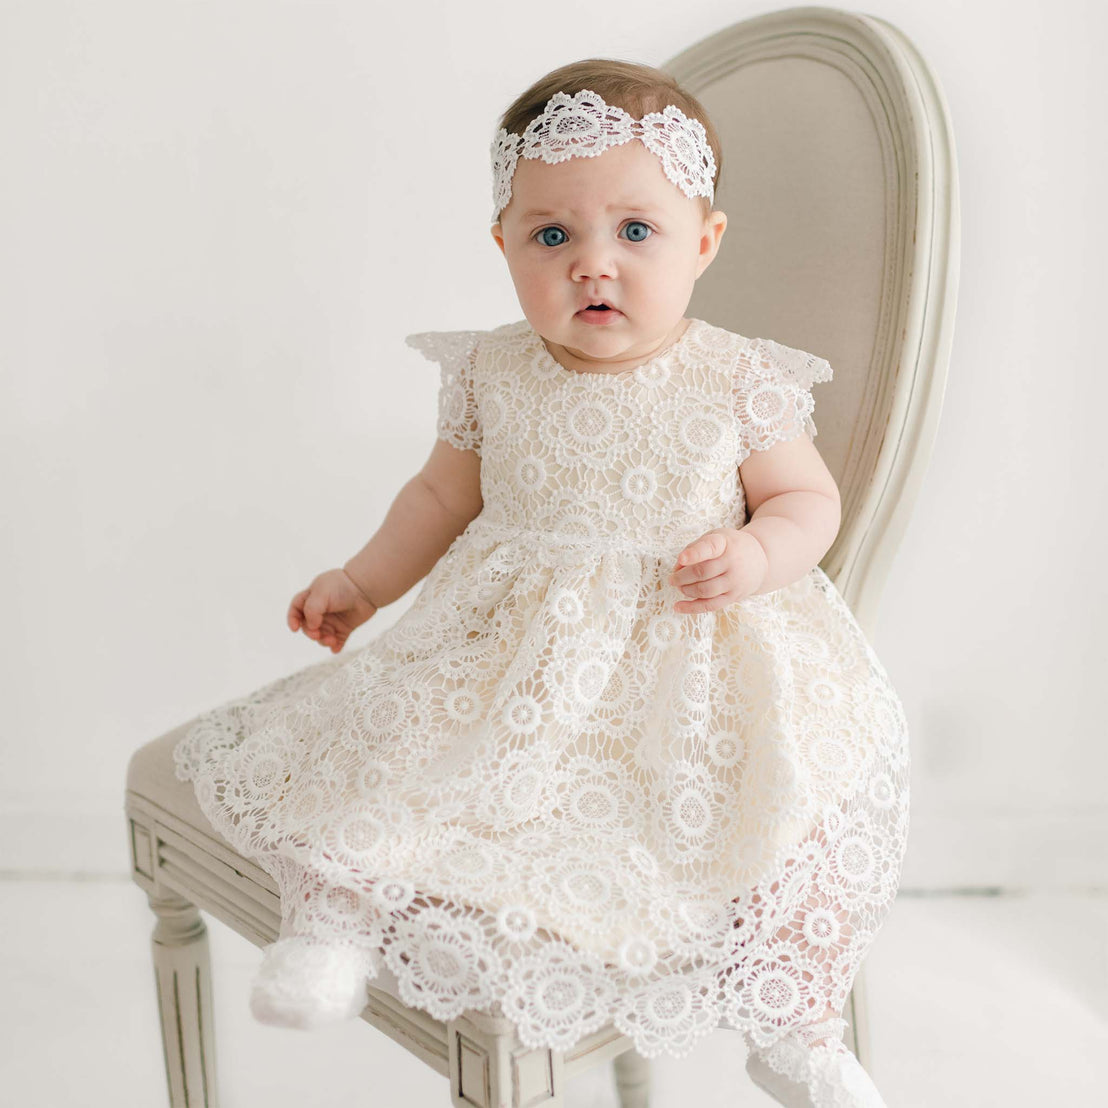 A baby sits on a beige chair, wearing a Poppy Blessing Dress & Bonnet with a silk dupioni lining. The baby has blue eyes and dark hair, looking directly at the camera with a neutral expression. The background is plain and white.